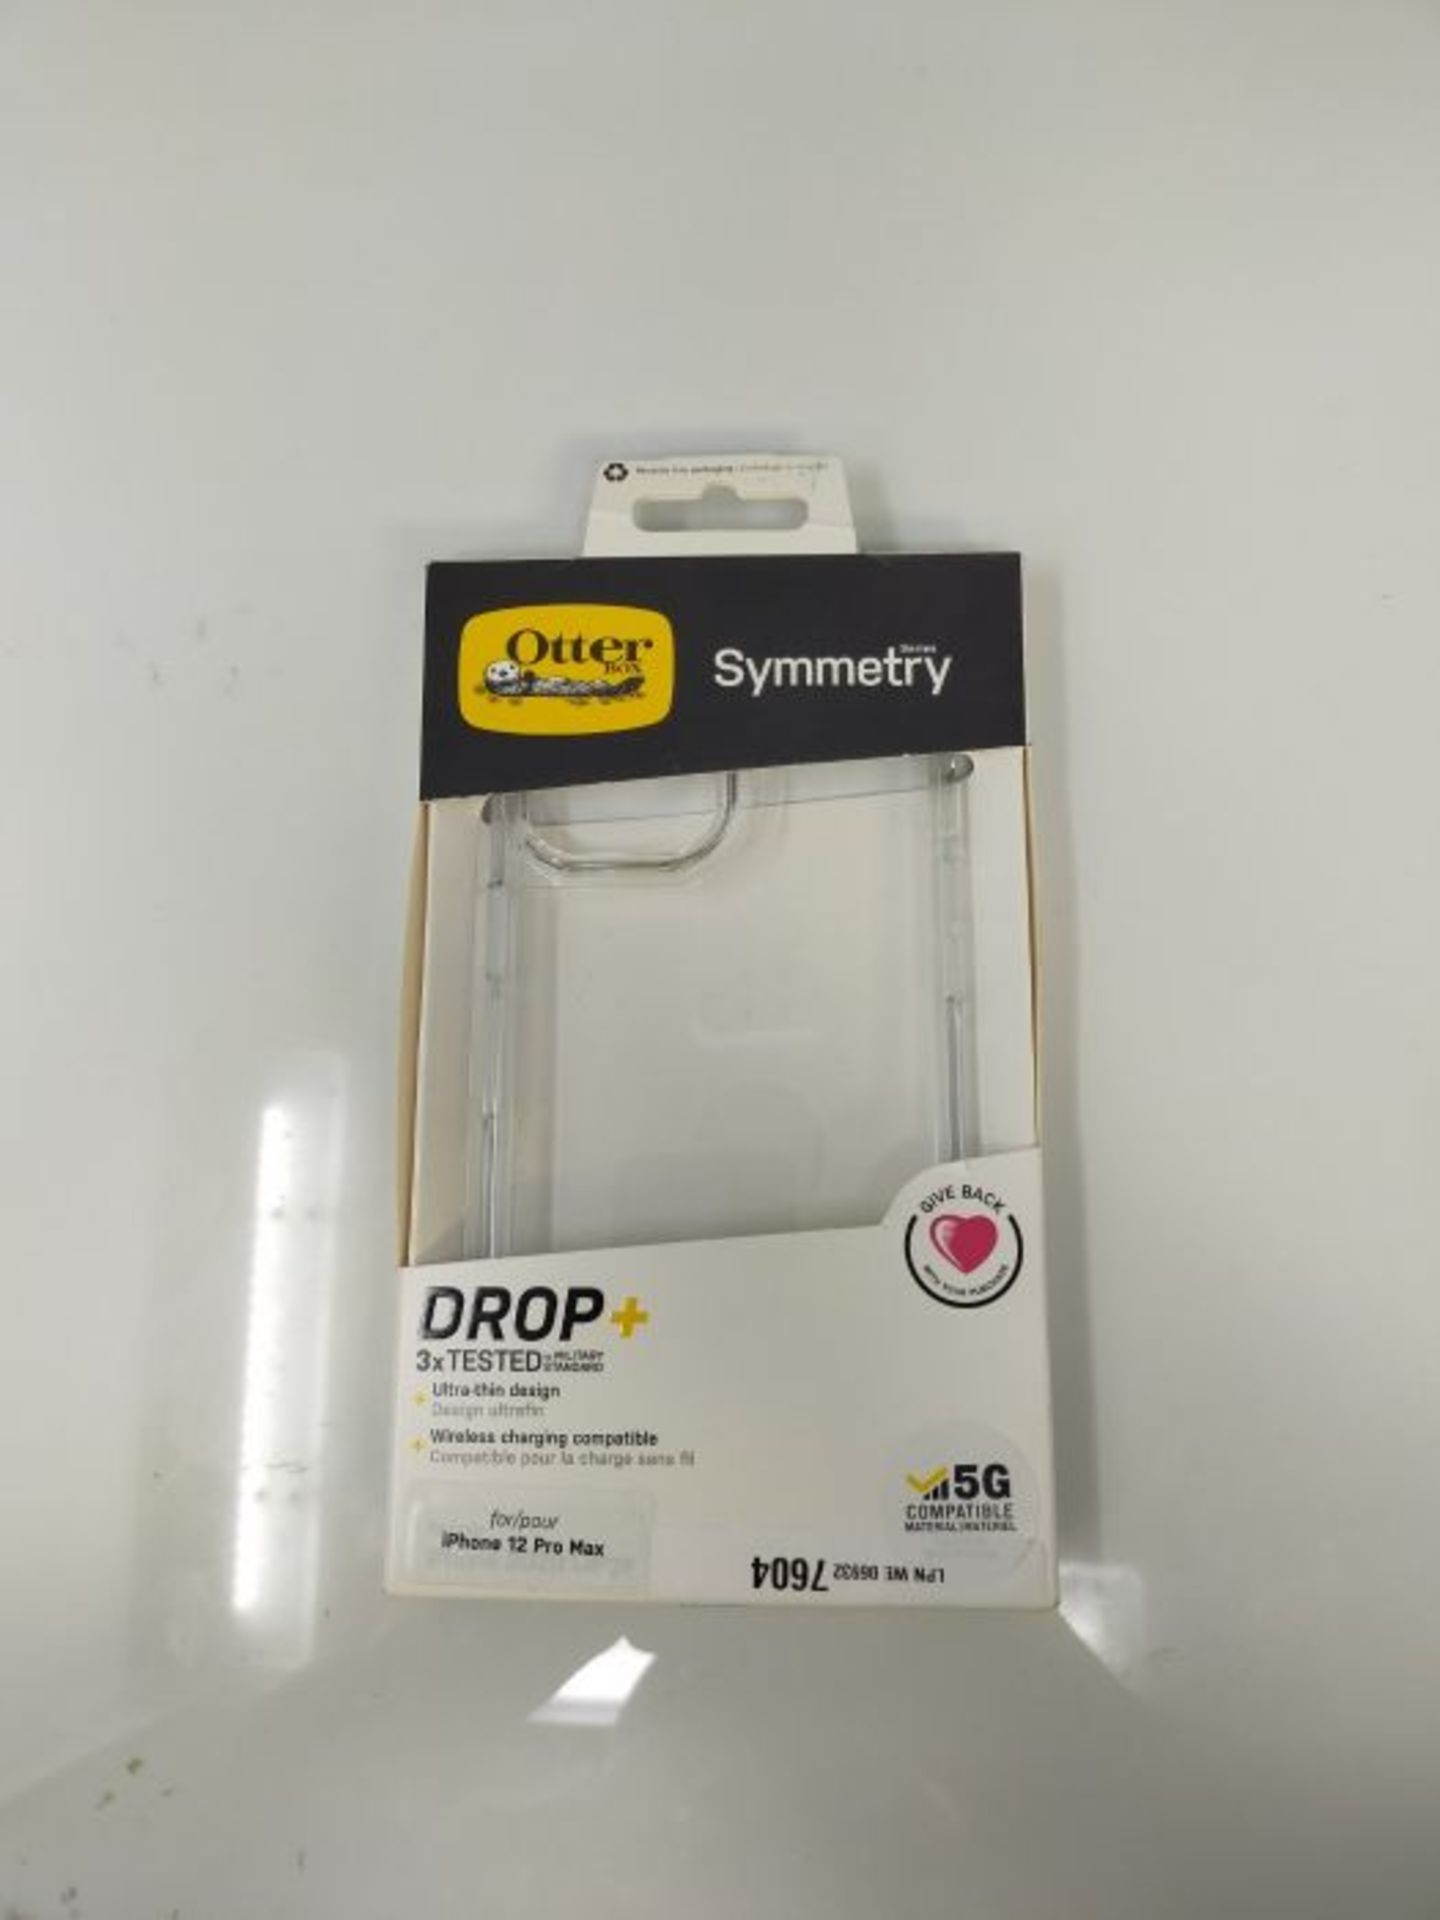 OtterBox for Apple iPhone 12 Pro Max, Sleek Drop Proof Protective Clear Case, Symmetry - Image 2 of 3